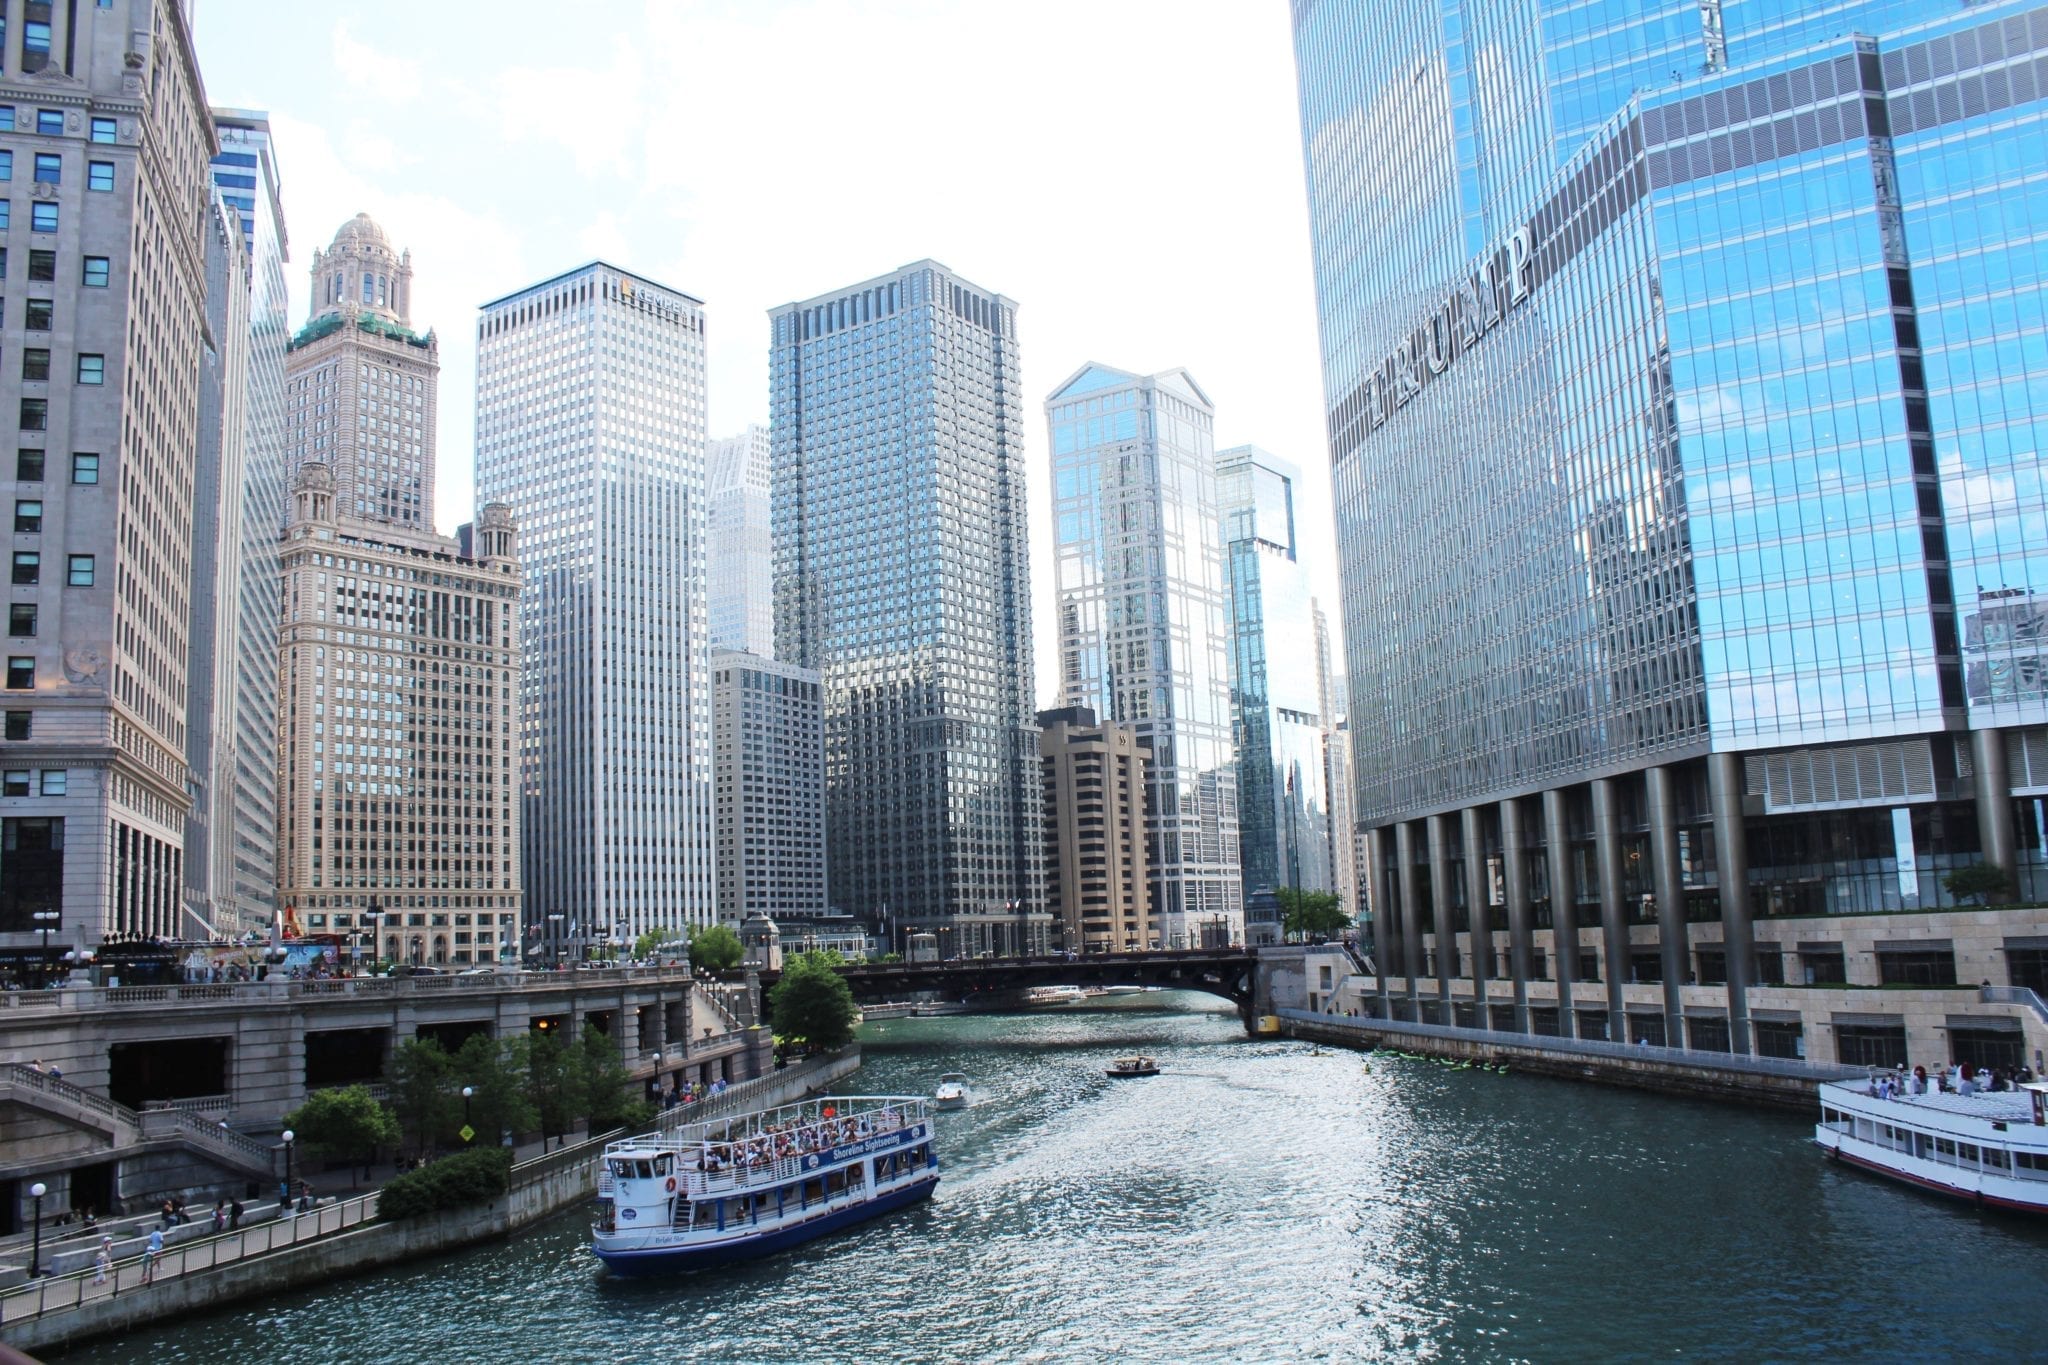 Chicago Boat Tours |7 THINGS YOU NEED TO SEE ON YOUR FIRST TRIP TO CHICAGO